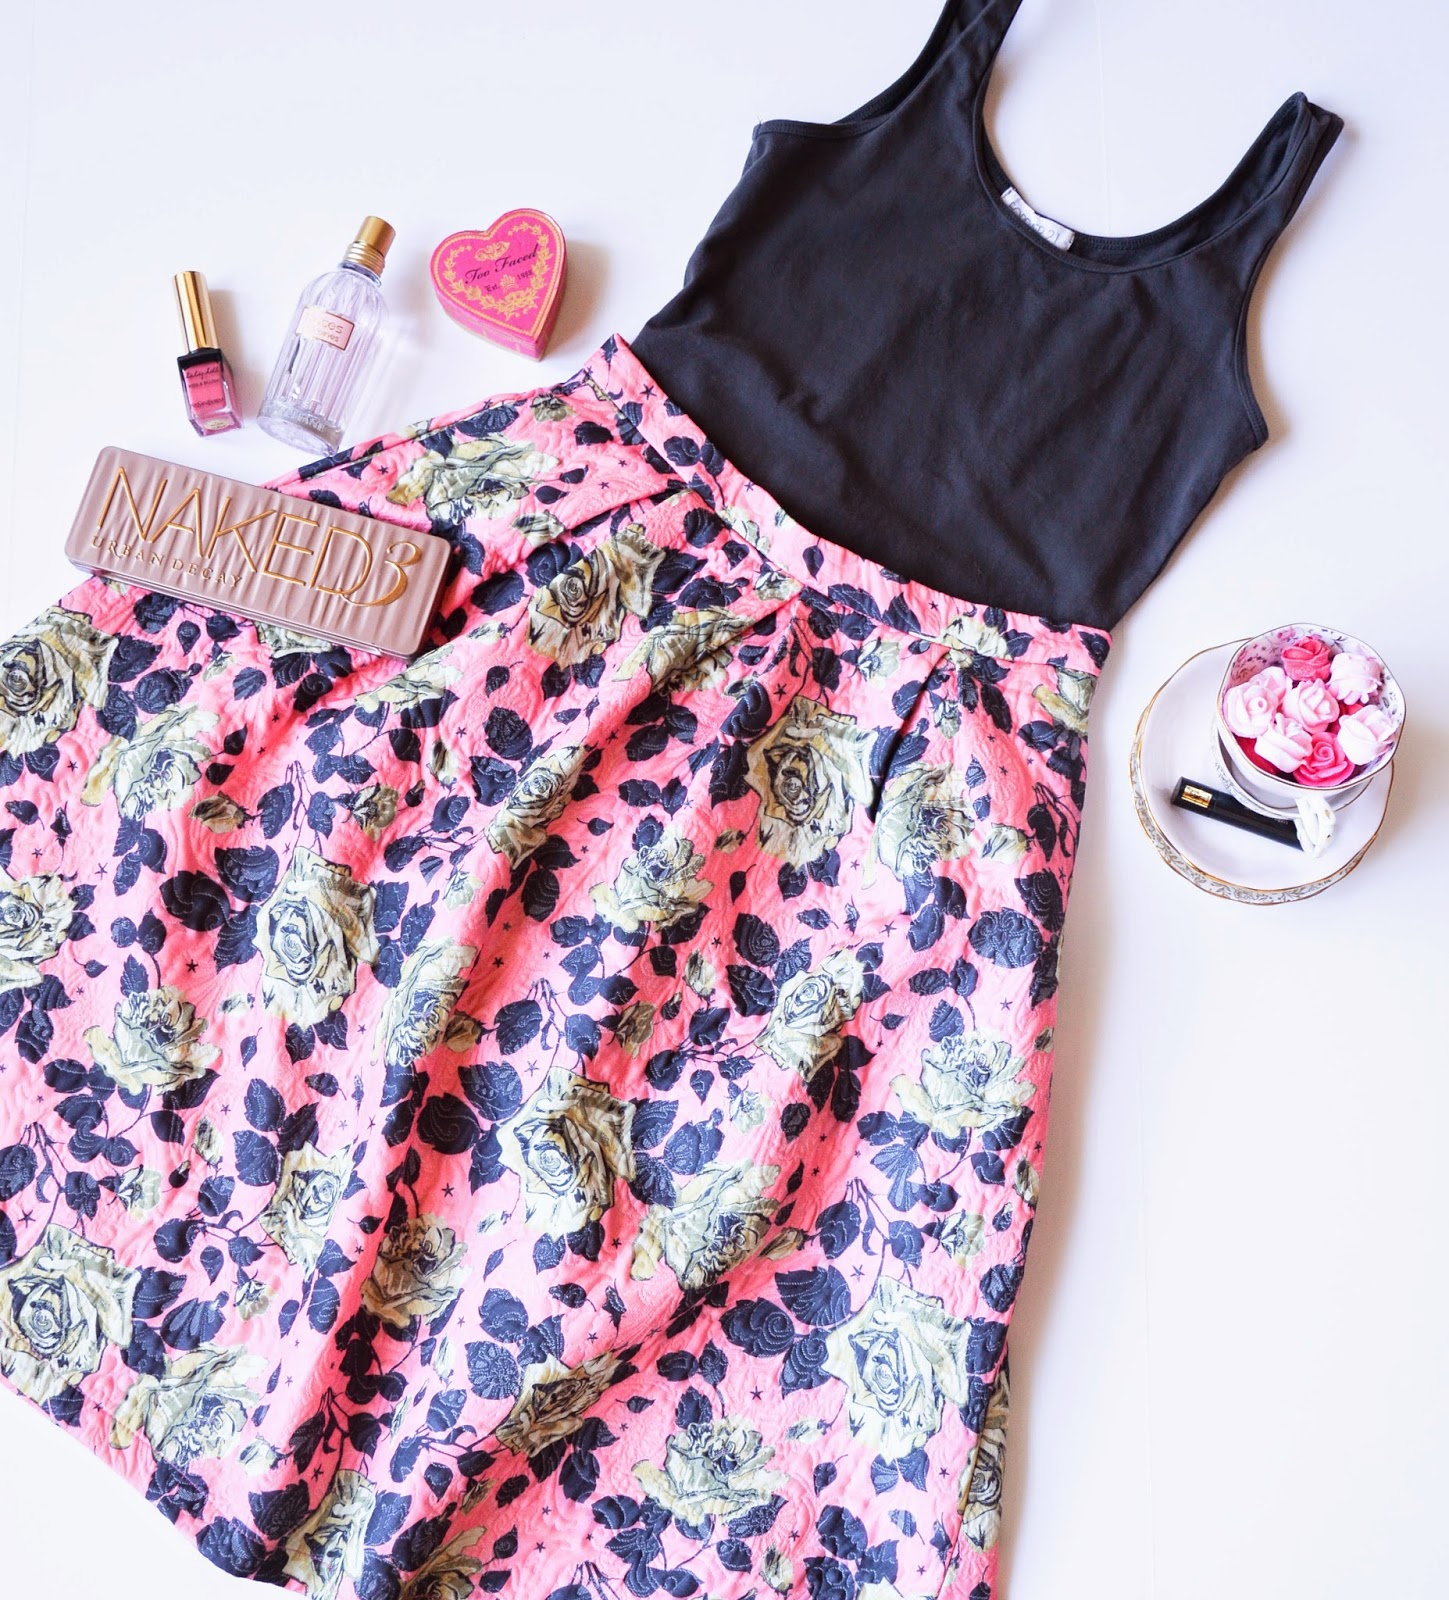 Pink and gray floral midi skirt from forever 21, paired with gray top